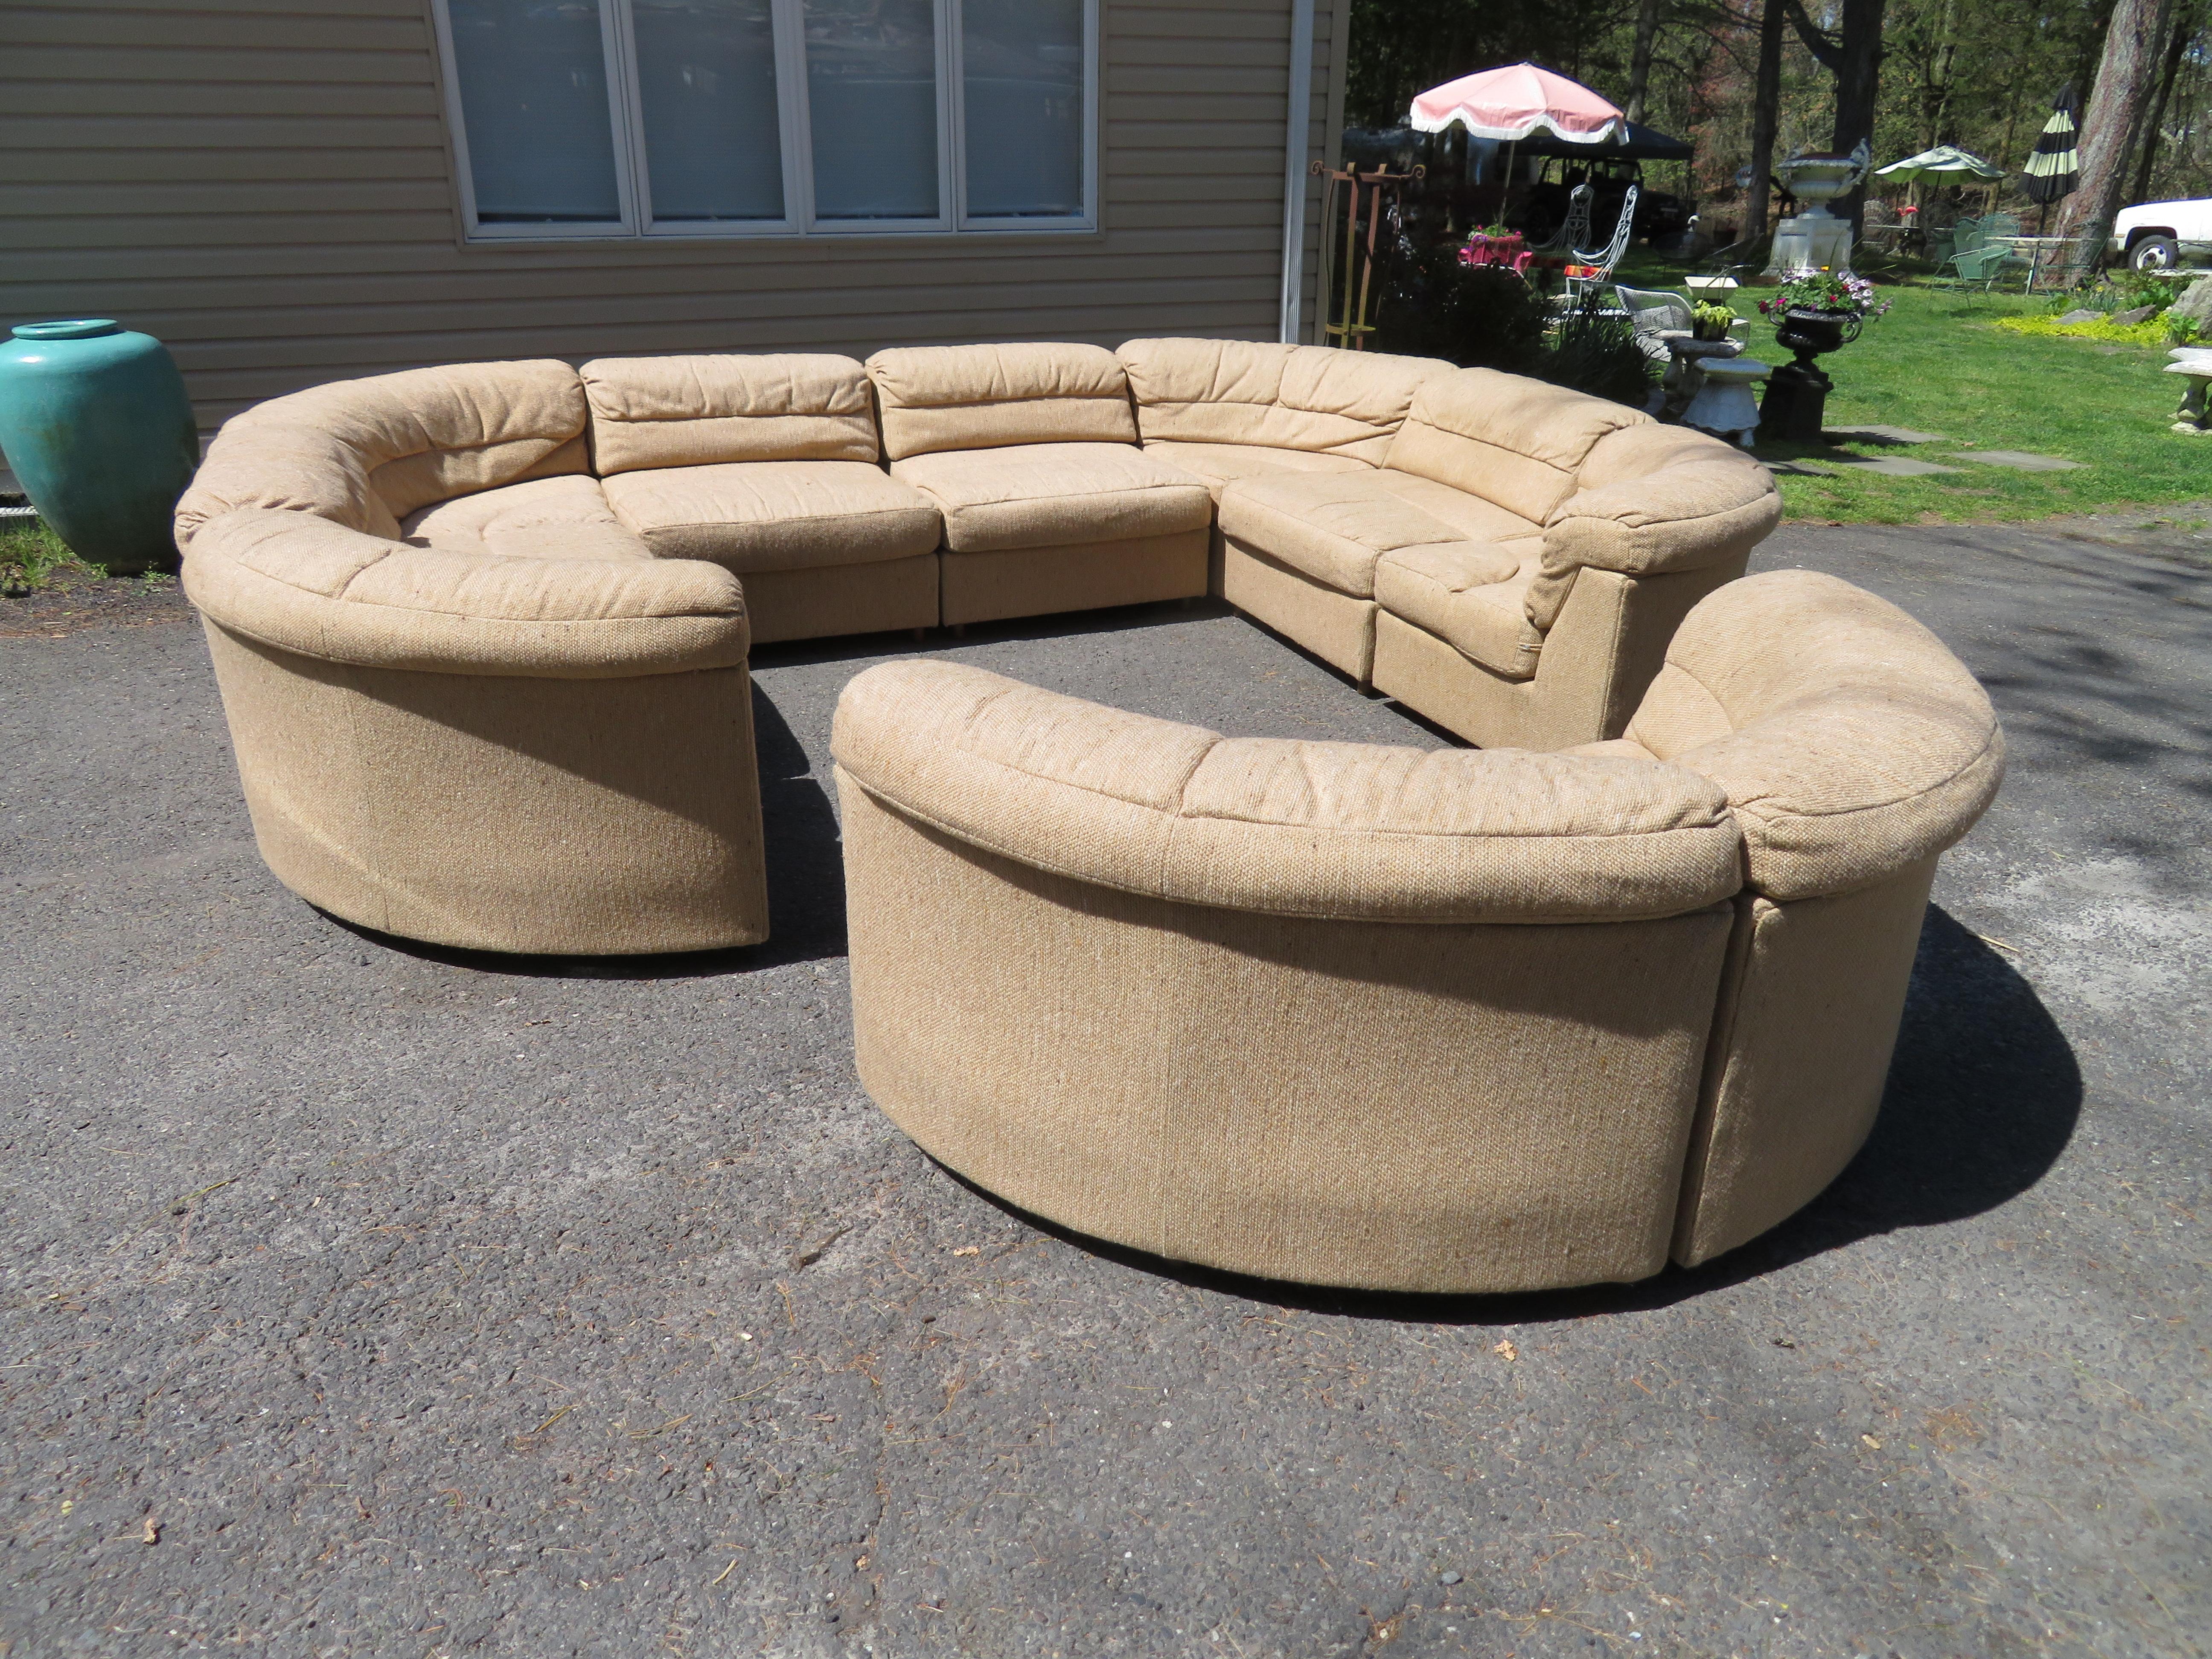 Mid-Century Modern Magnificent 10 Piece Milo Baughman Style Curved Cube Sofa Sectional Mid-Century